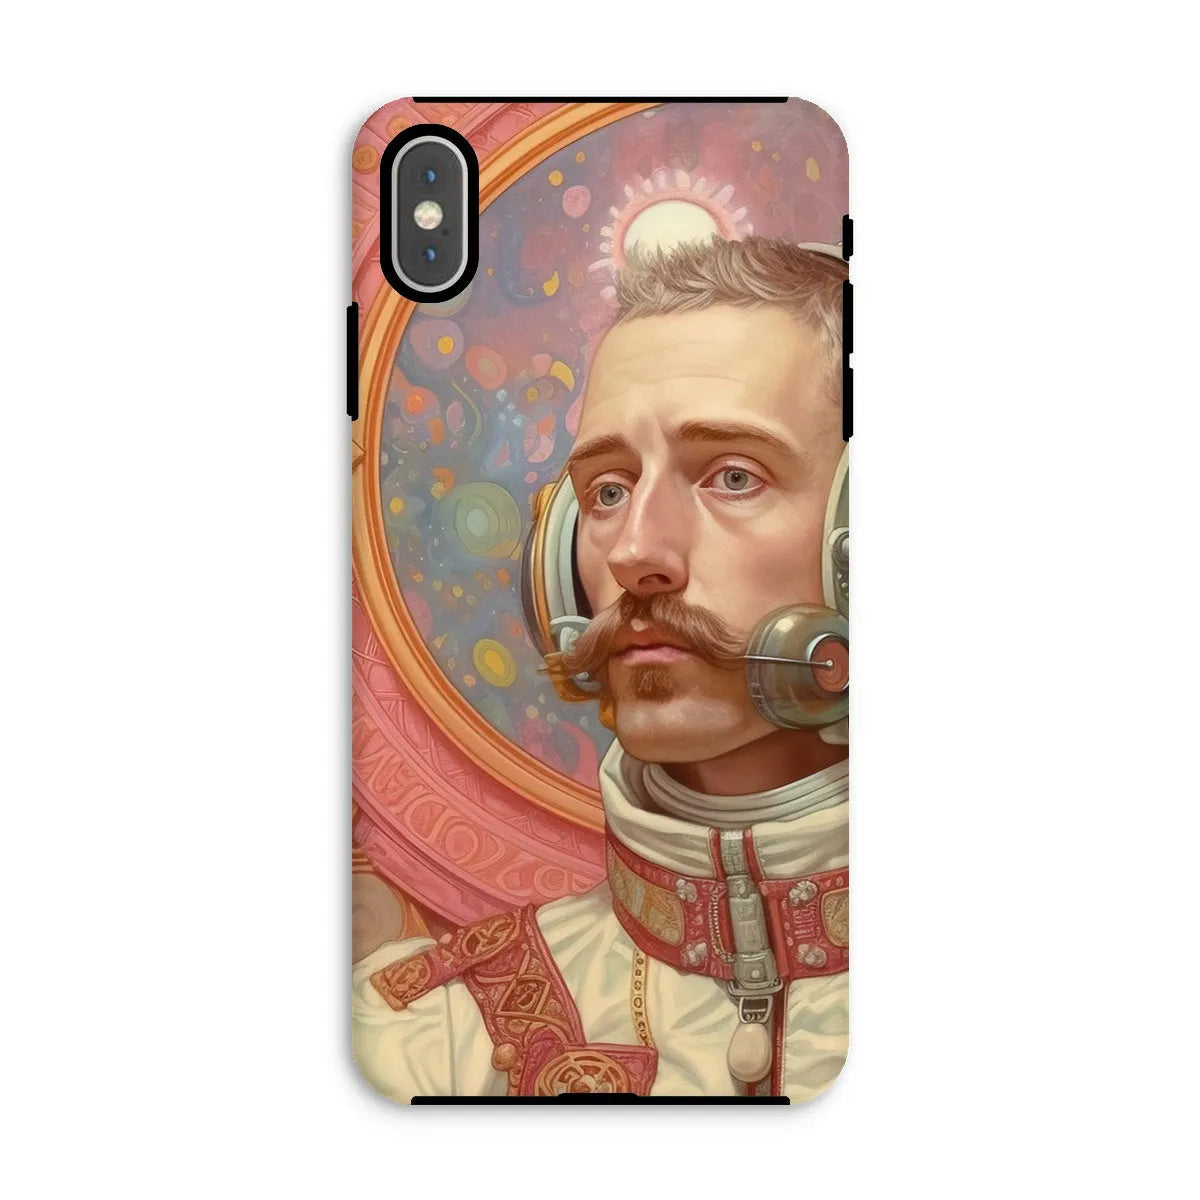 Axel - Gay German Astronaut Aesthetic Art Phone Case - Iphone Xs Max / Matte - Mobile Phone Cases - Aesthetic Art